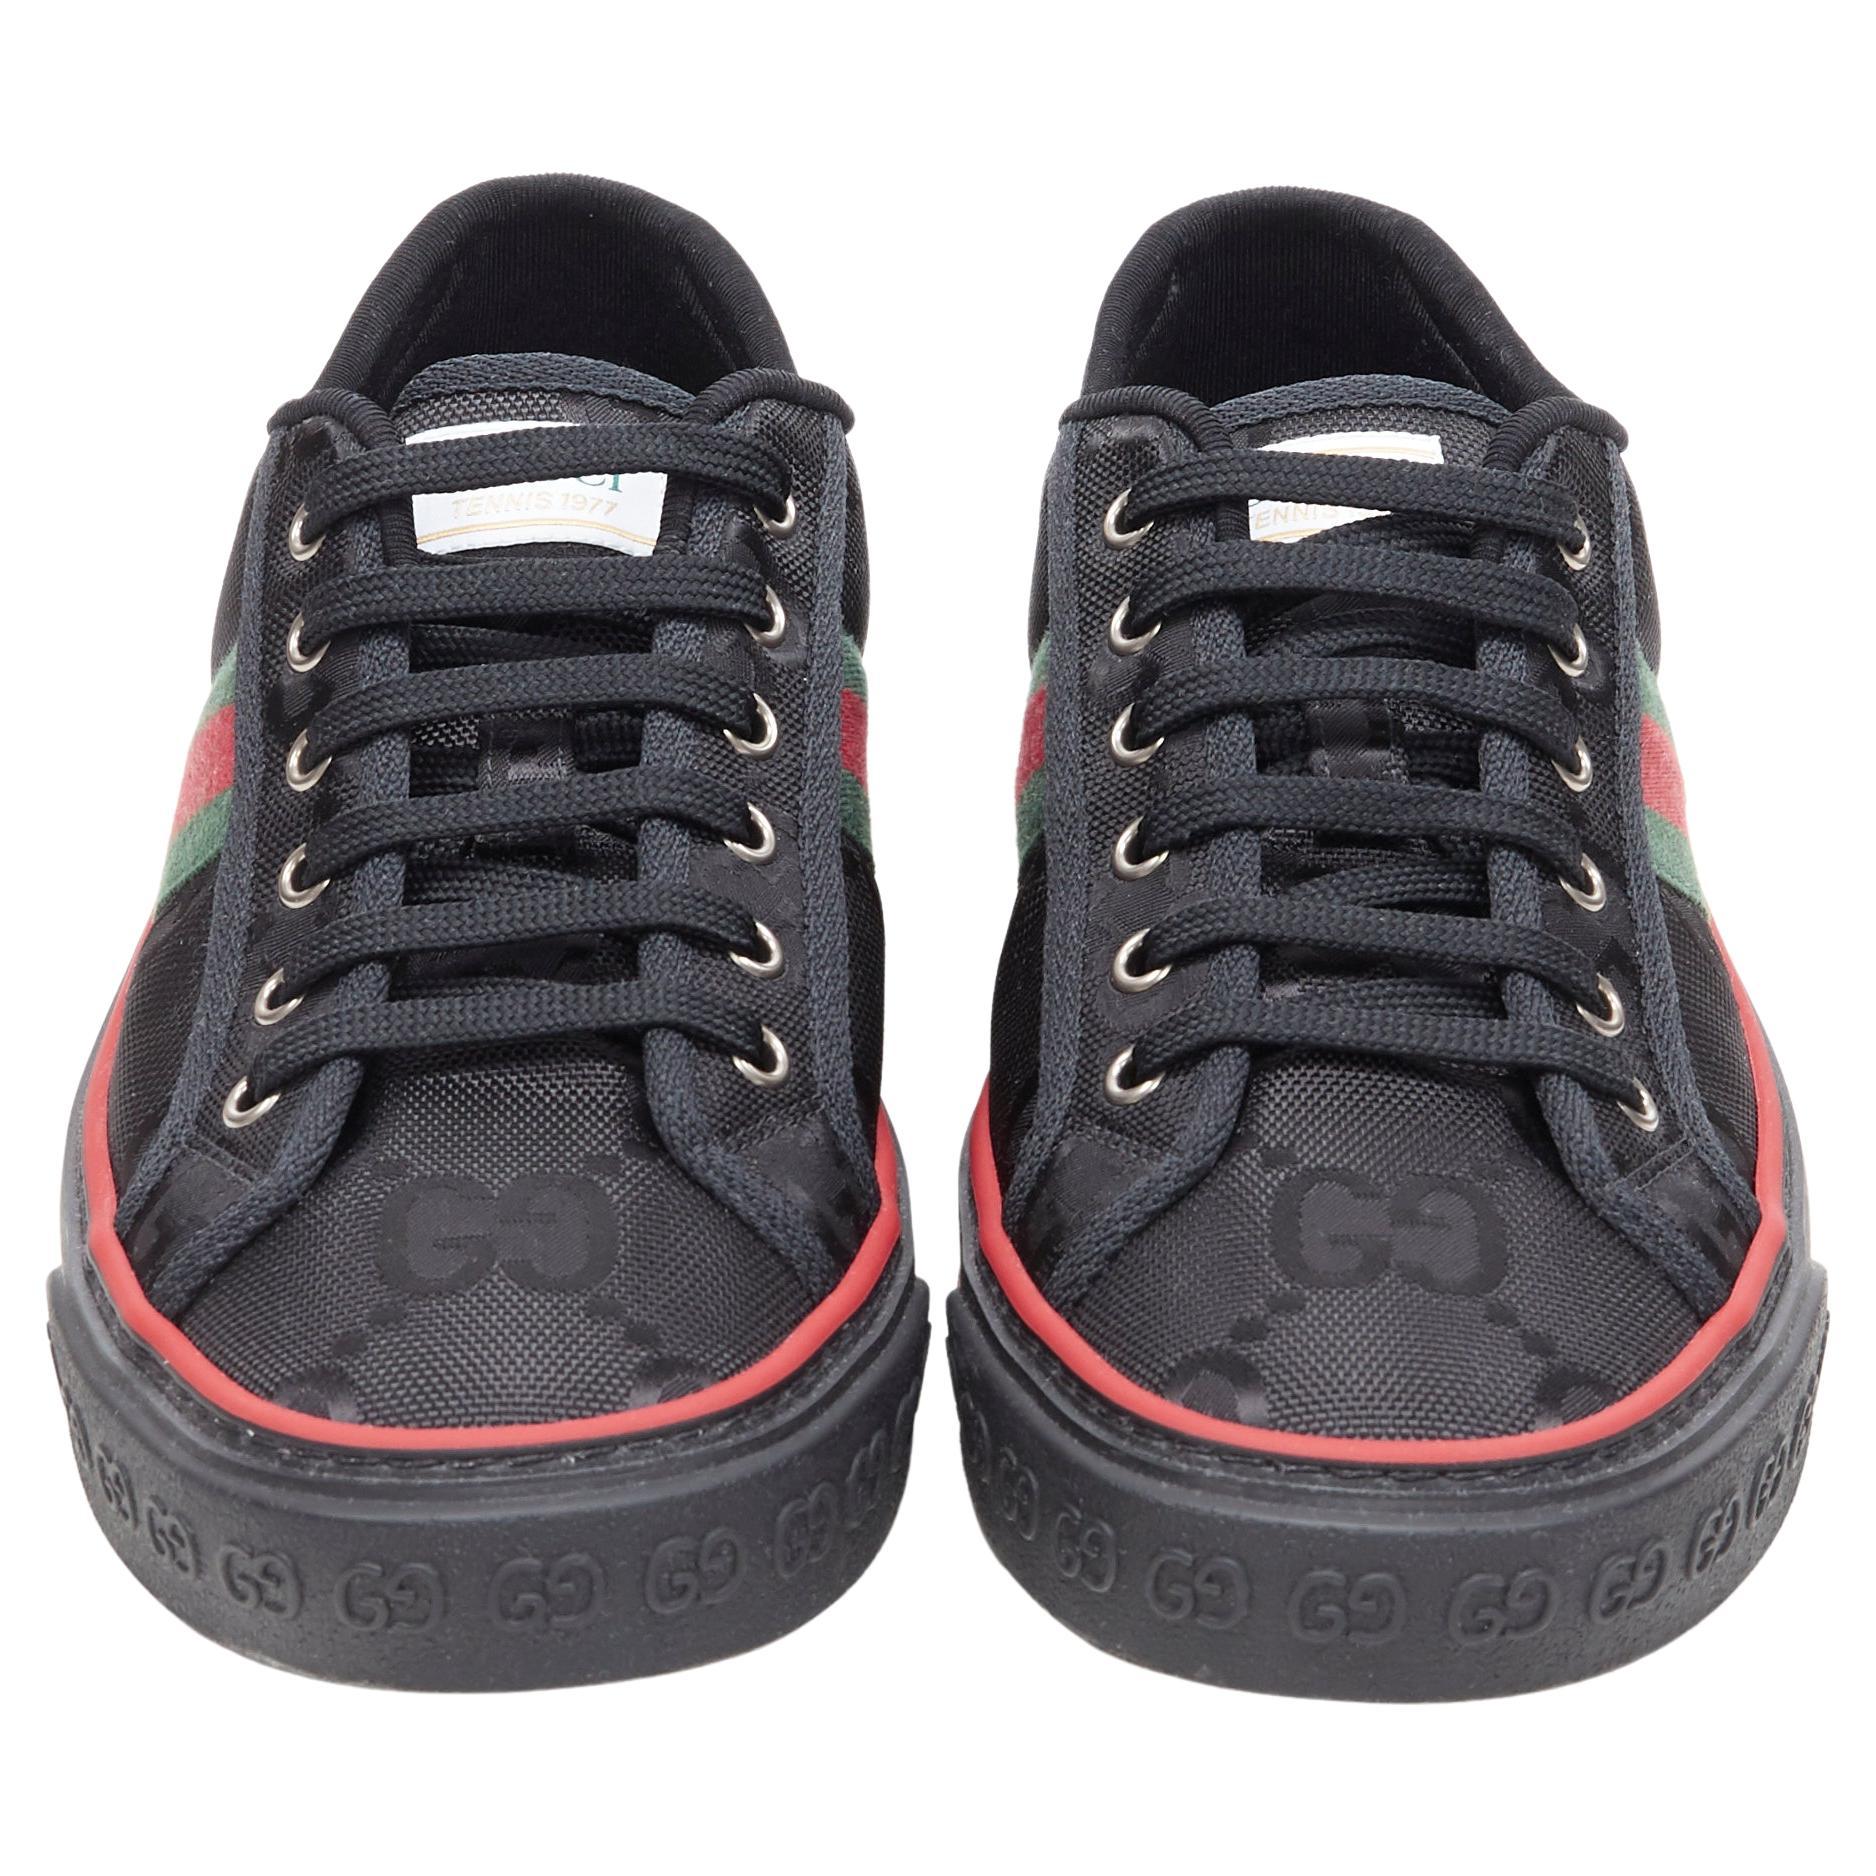 new GUCCI Off The Grid Tennis 1977 black monogram red green web sneaker UK8 Reference: JOMK/A00006 
Brand: Gucci 
Designer: Alessandro Michele 
Model: Tennis 1977 
Material: Nylon 
Color: Black 
Pattern: Solid 
Closure: Lace Up 
Extra Detail: Part